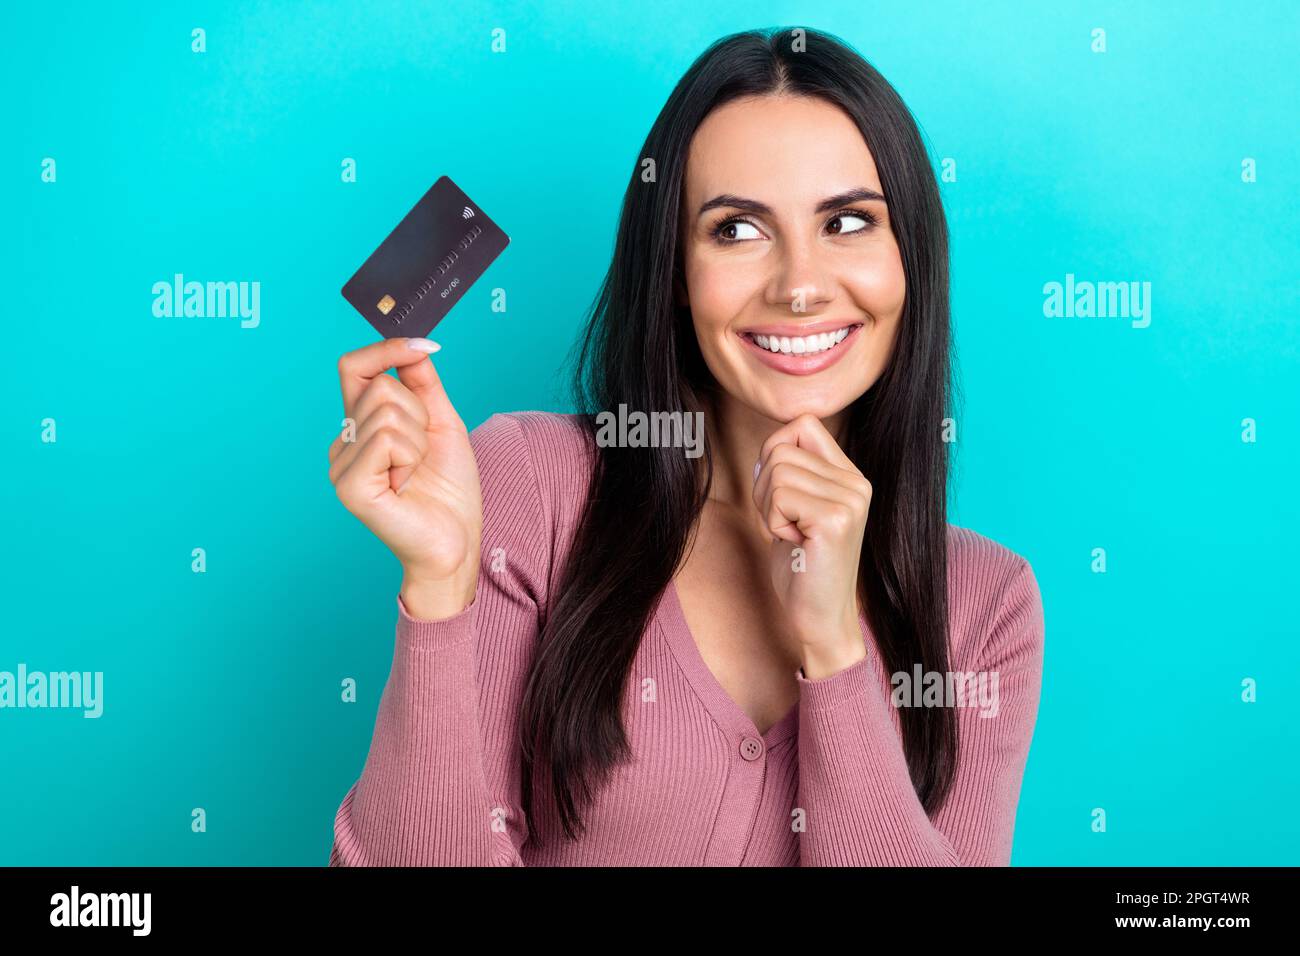 Portrait photo of young promoter optimistic woman smile visa mastercard debit card new terms high percent cashback isolated on blue color background Stock Photo